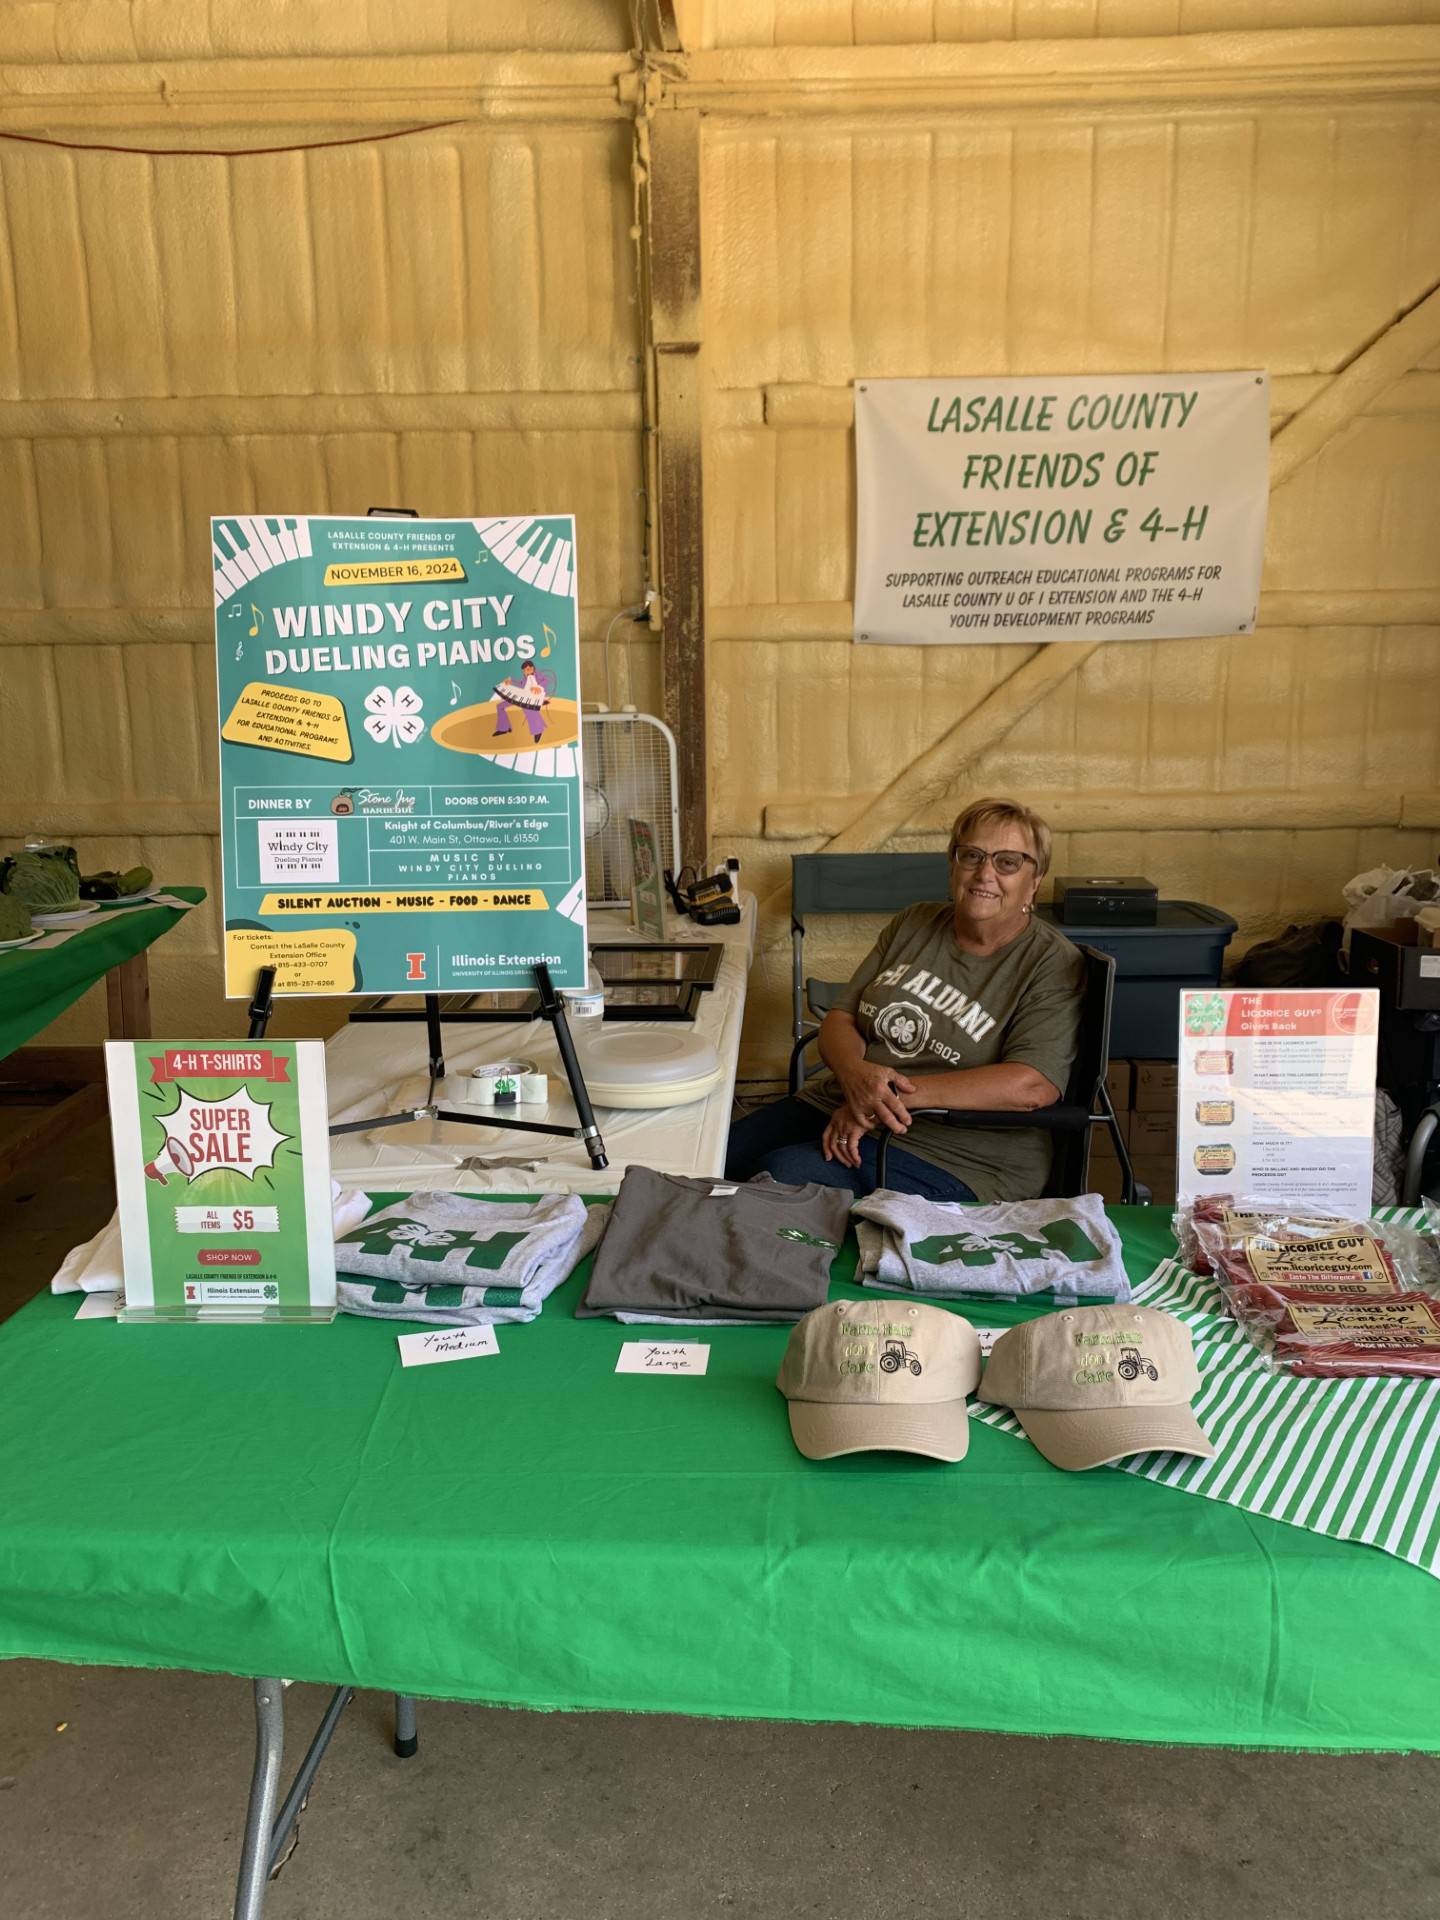 Gail Hayward, Chairman of La Salle County Friends of University of Illinois Extension & 4-H, as she sits at a fundraising booth selling 4-H merchandise and licorice with proceeds going to educational programs and activities in LaSalle County. (Bill Freskos)